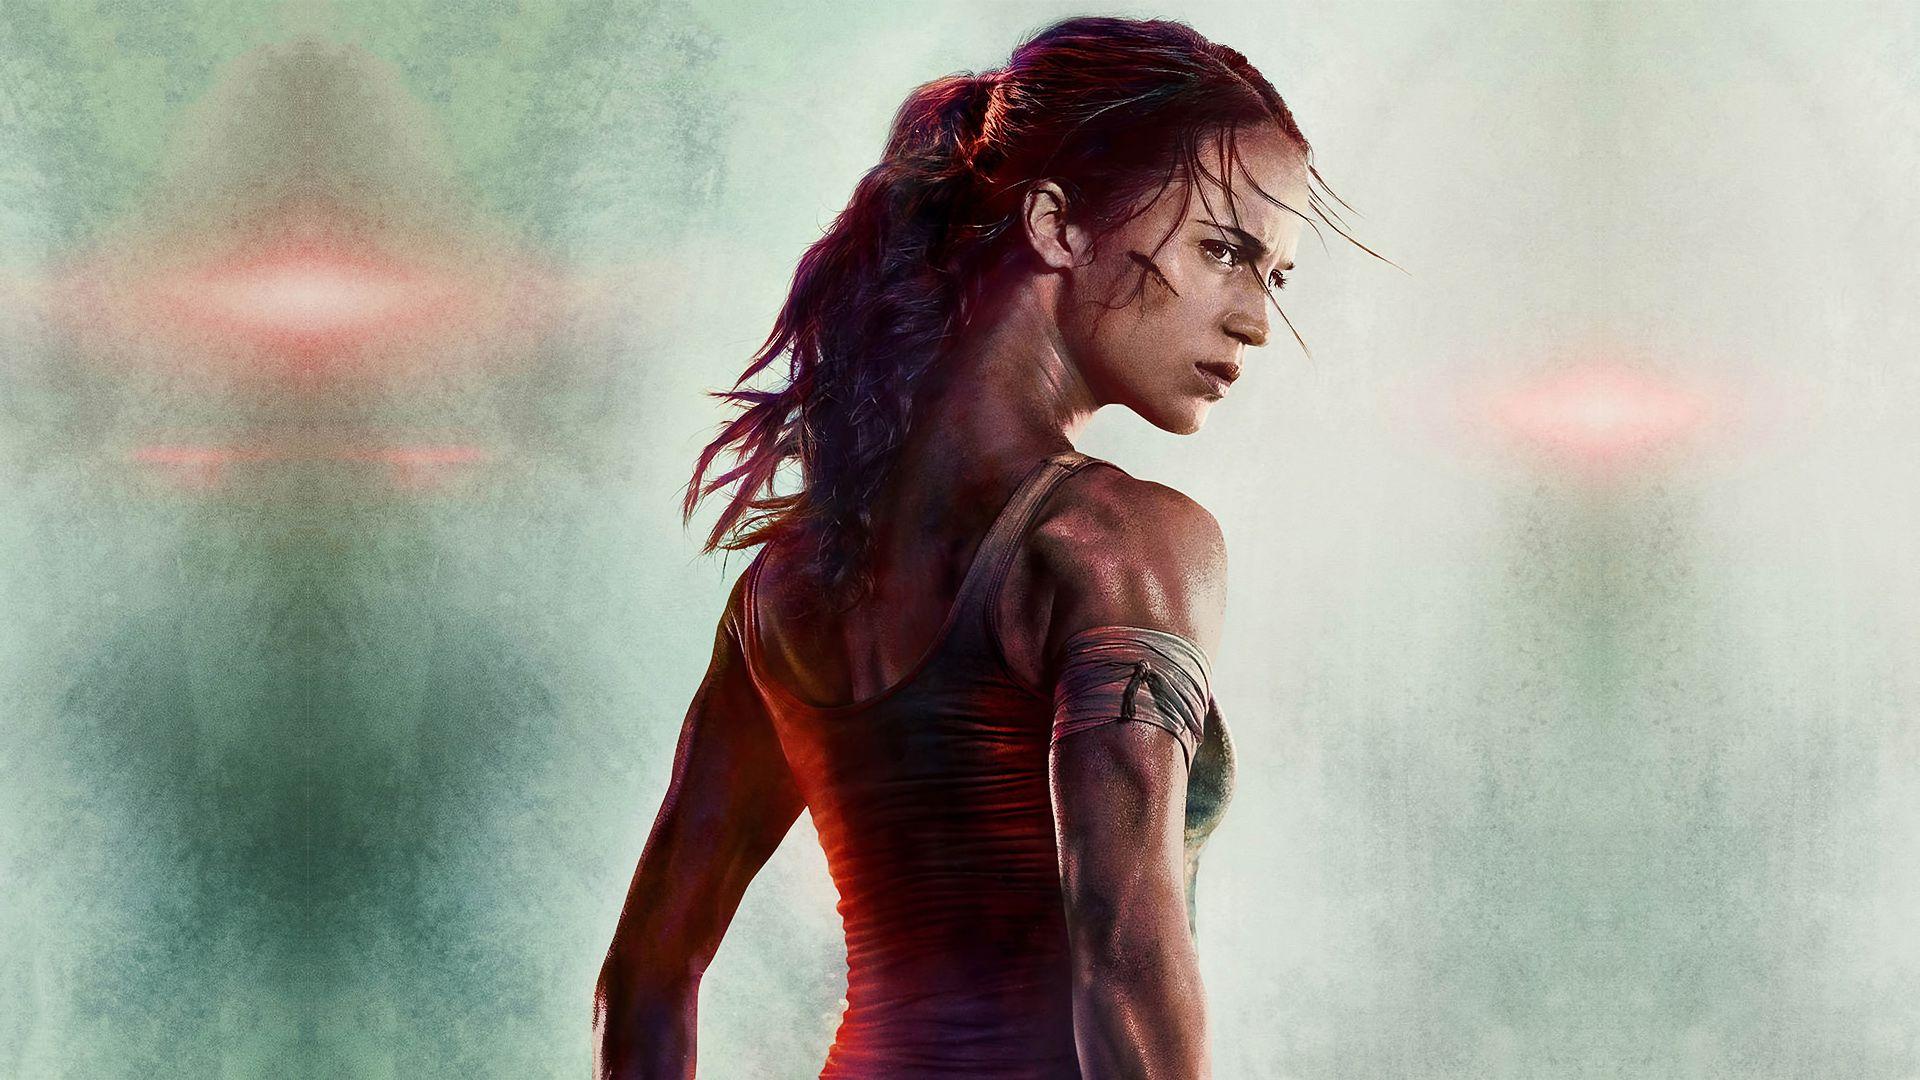 Tomb Raider Movie Wallpapers - Top Free Tomb Raider Movie Backgrounds ...